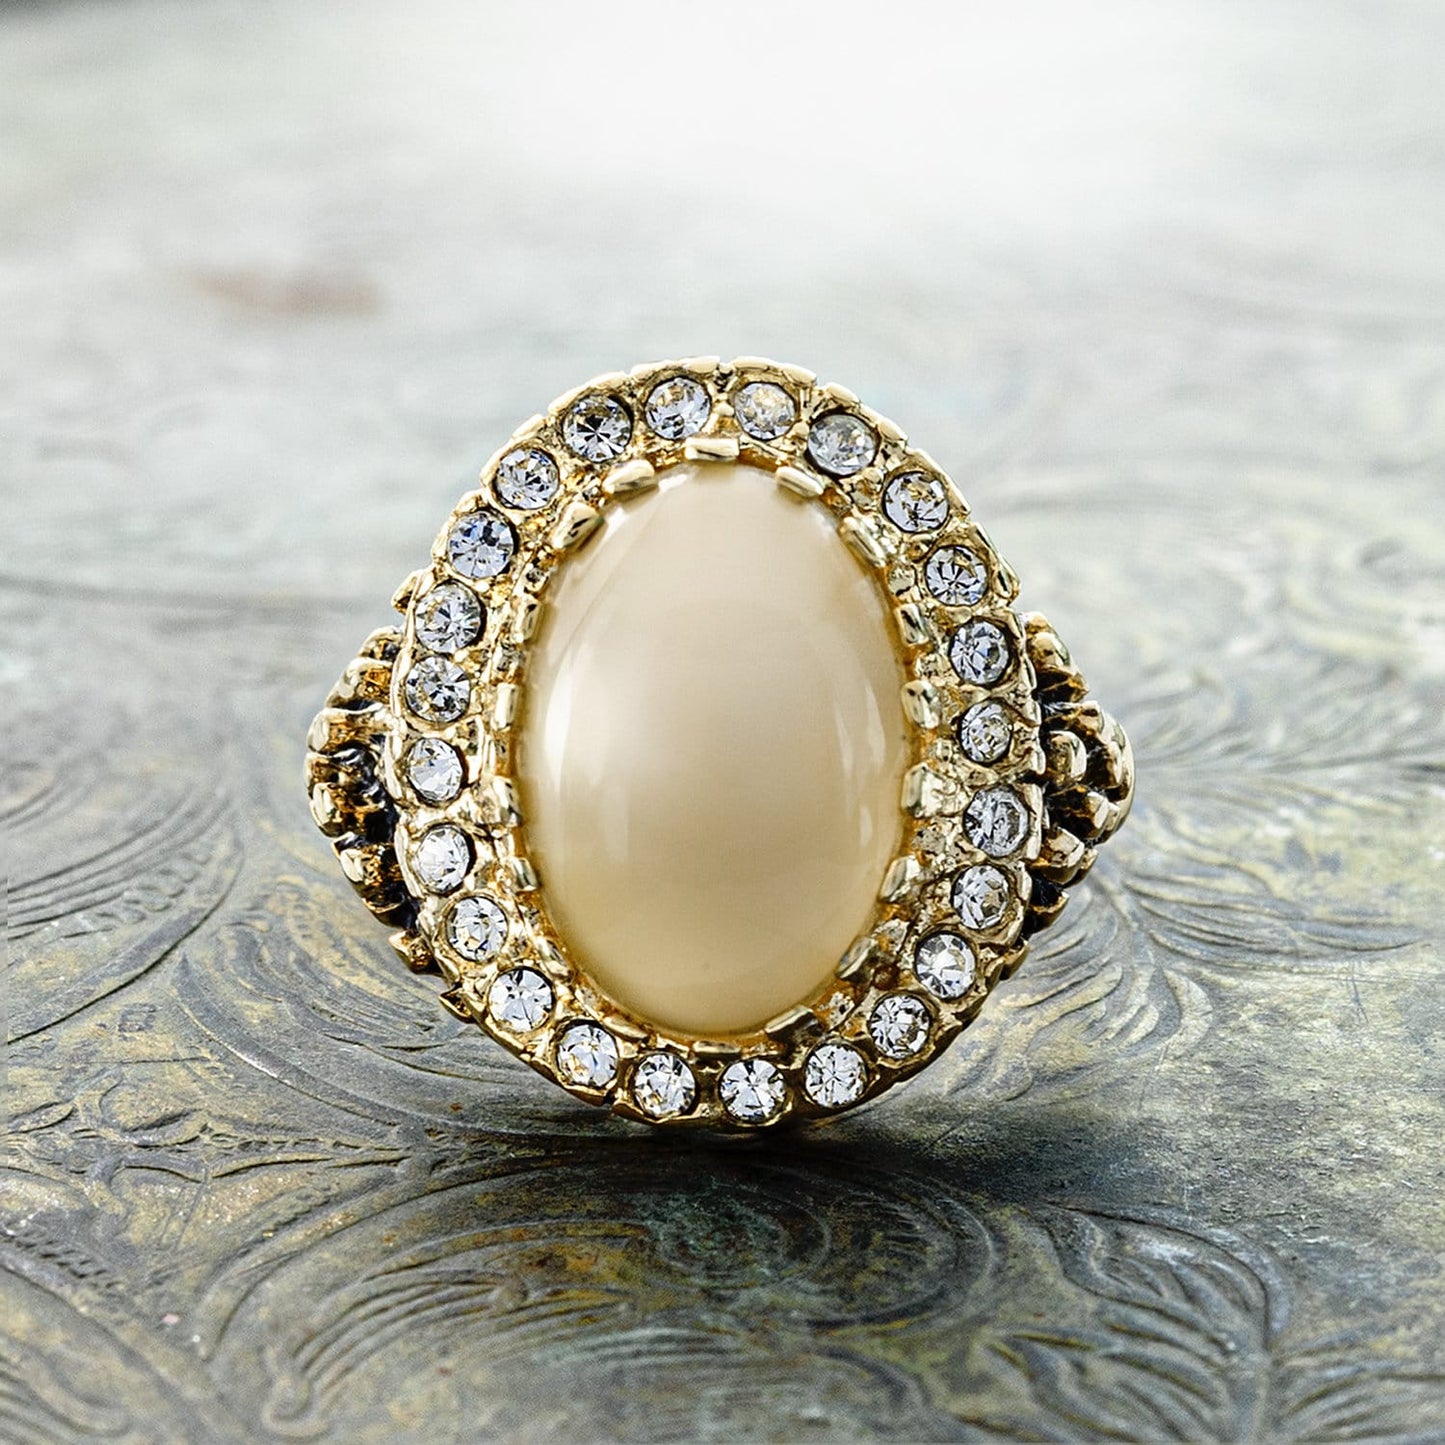 Vintage Ring Genuine Beige Moonstone and Clear Crystal Ring Edwardian Style Antique 18k Gold Ring Womans R169 - Limited Stock - Never Worn